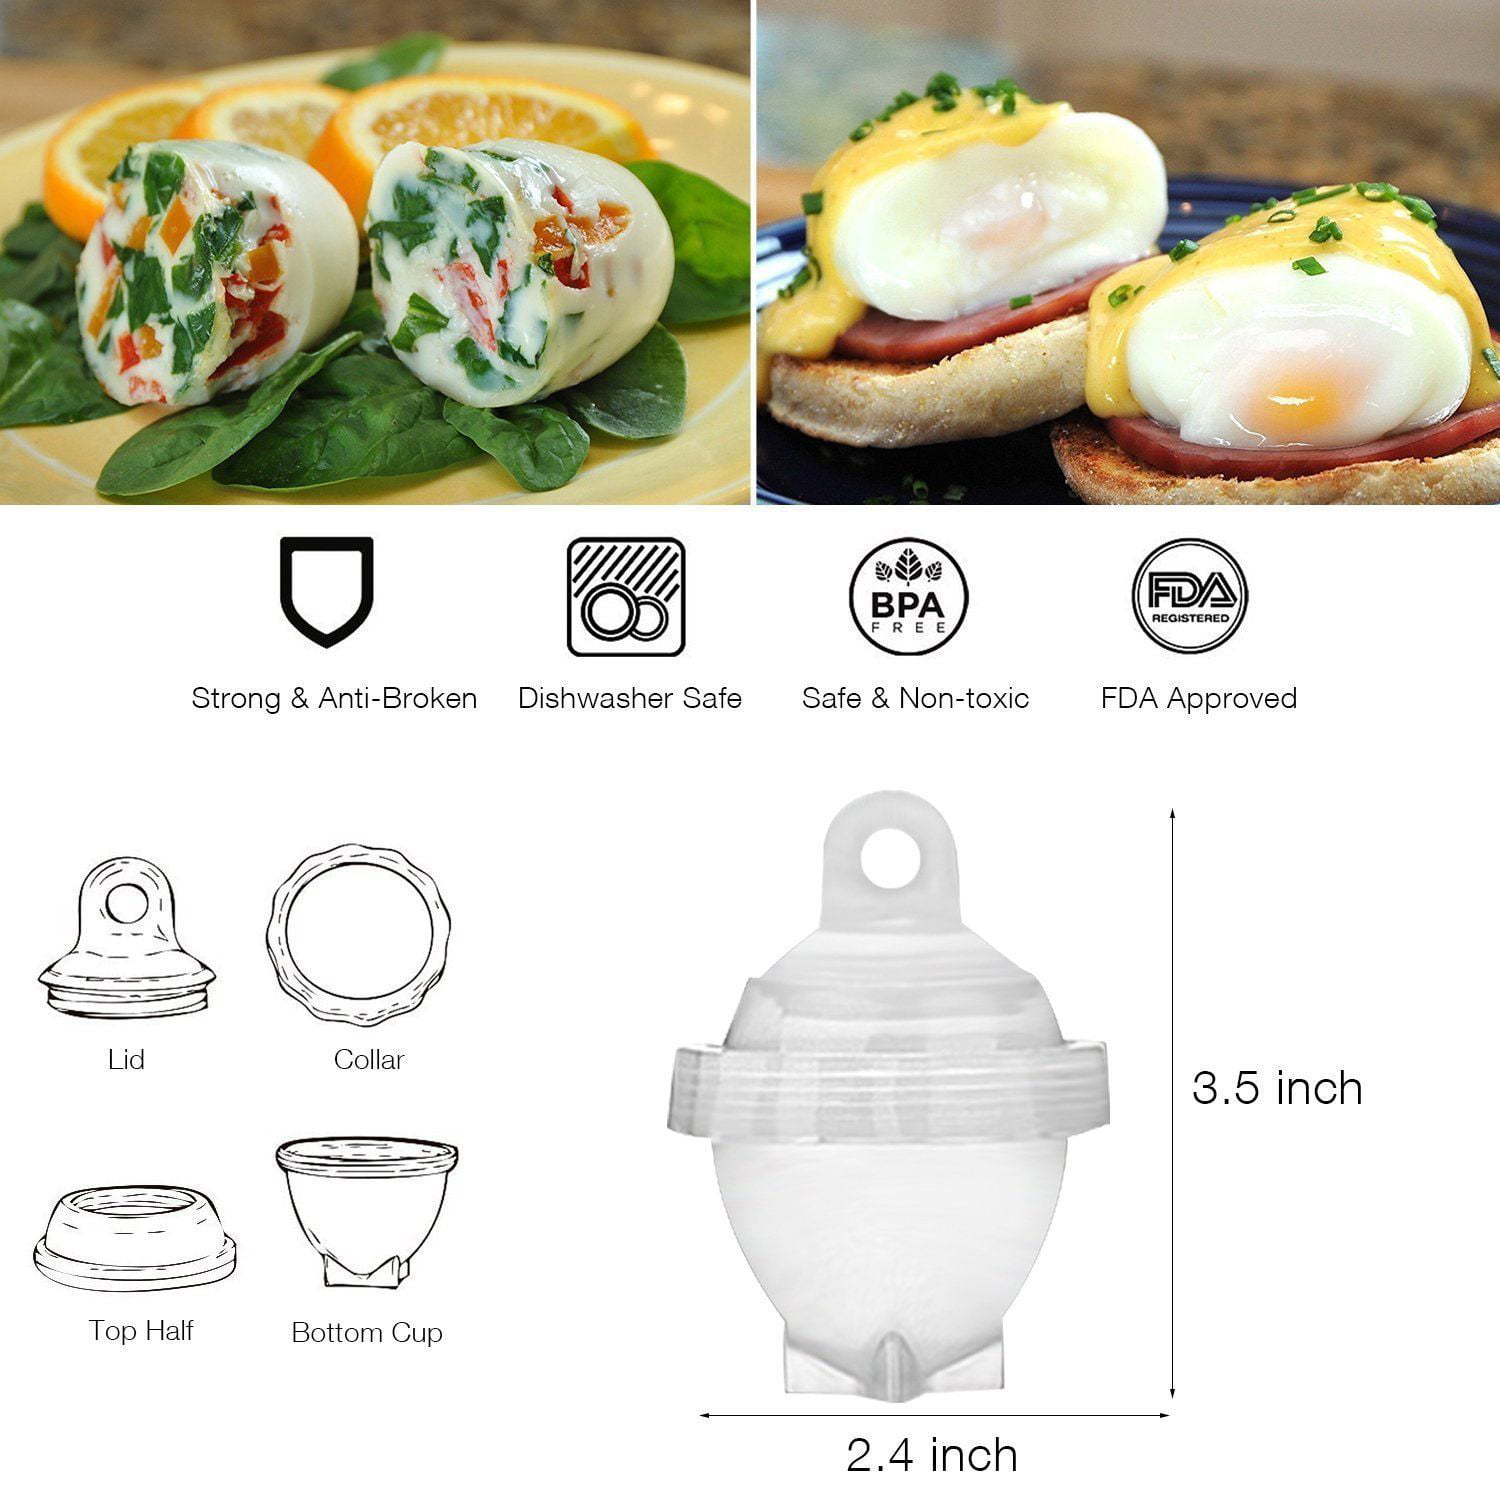 Home City Market No.1 Hard Boiled Silicone Egg Cooker Without The Shell As Seen on TV, Non Stick Egg Poacher with Holder